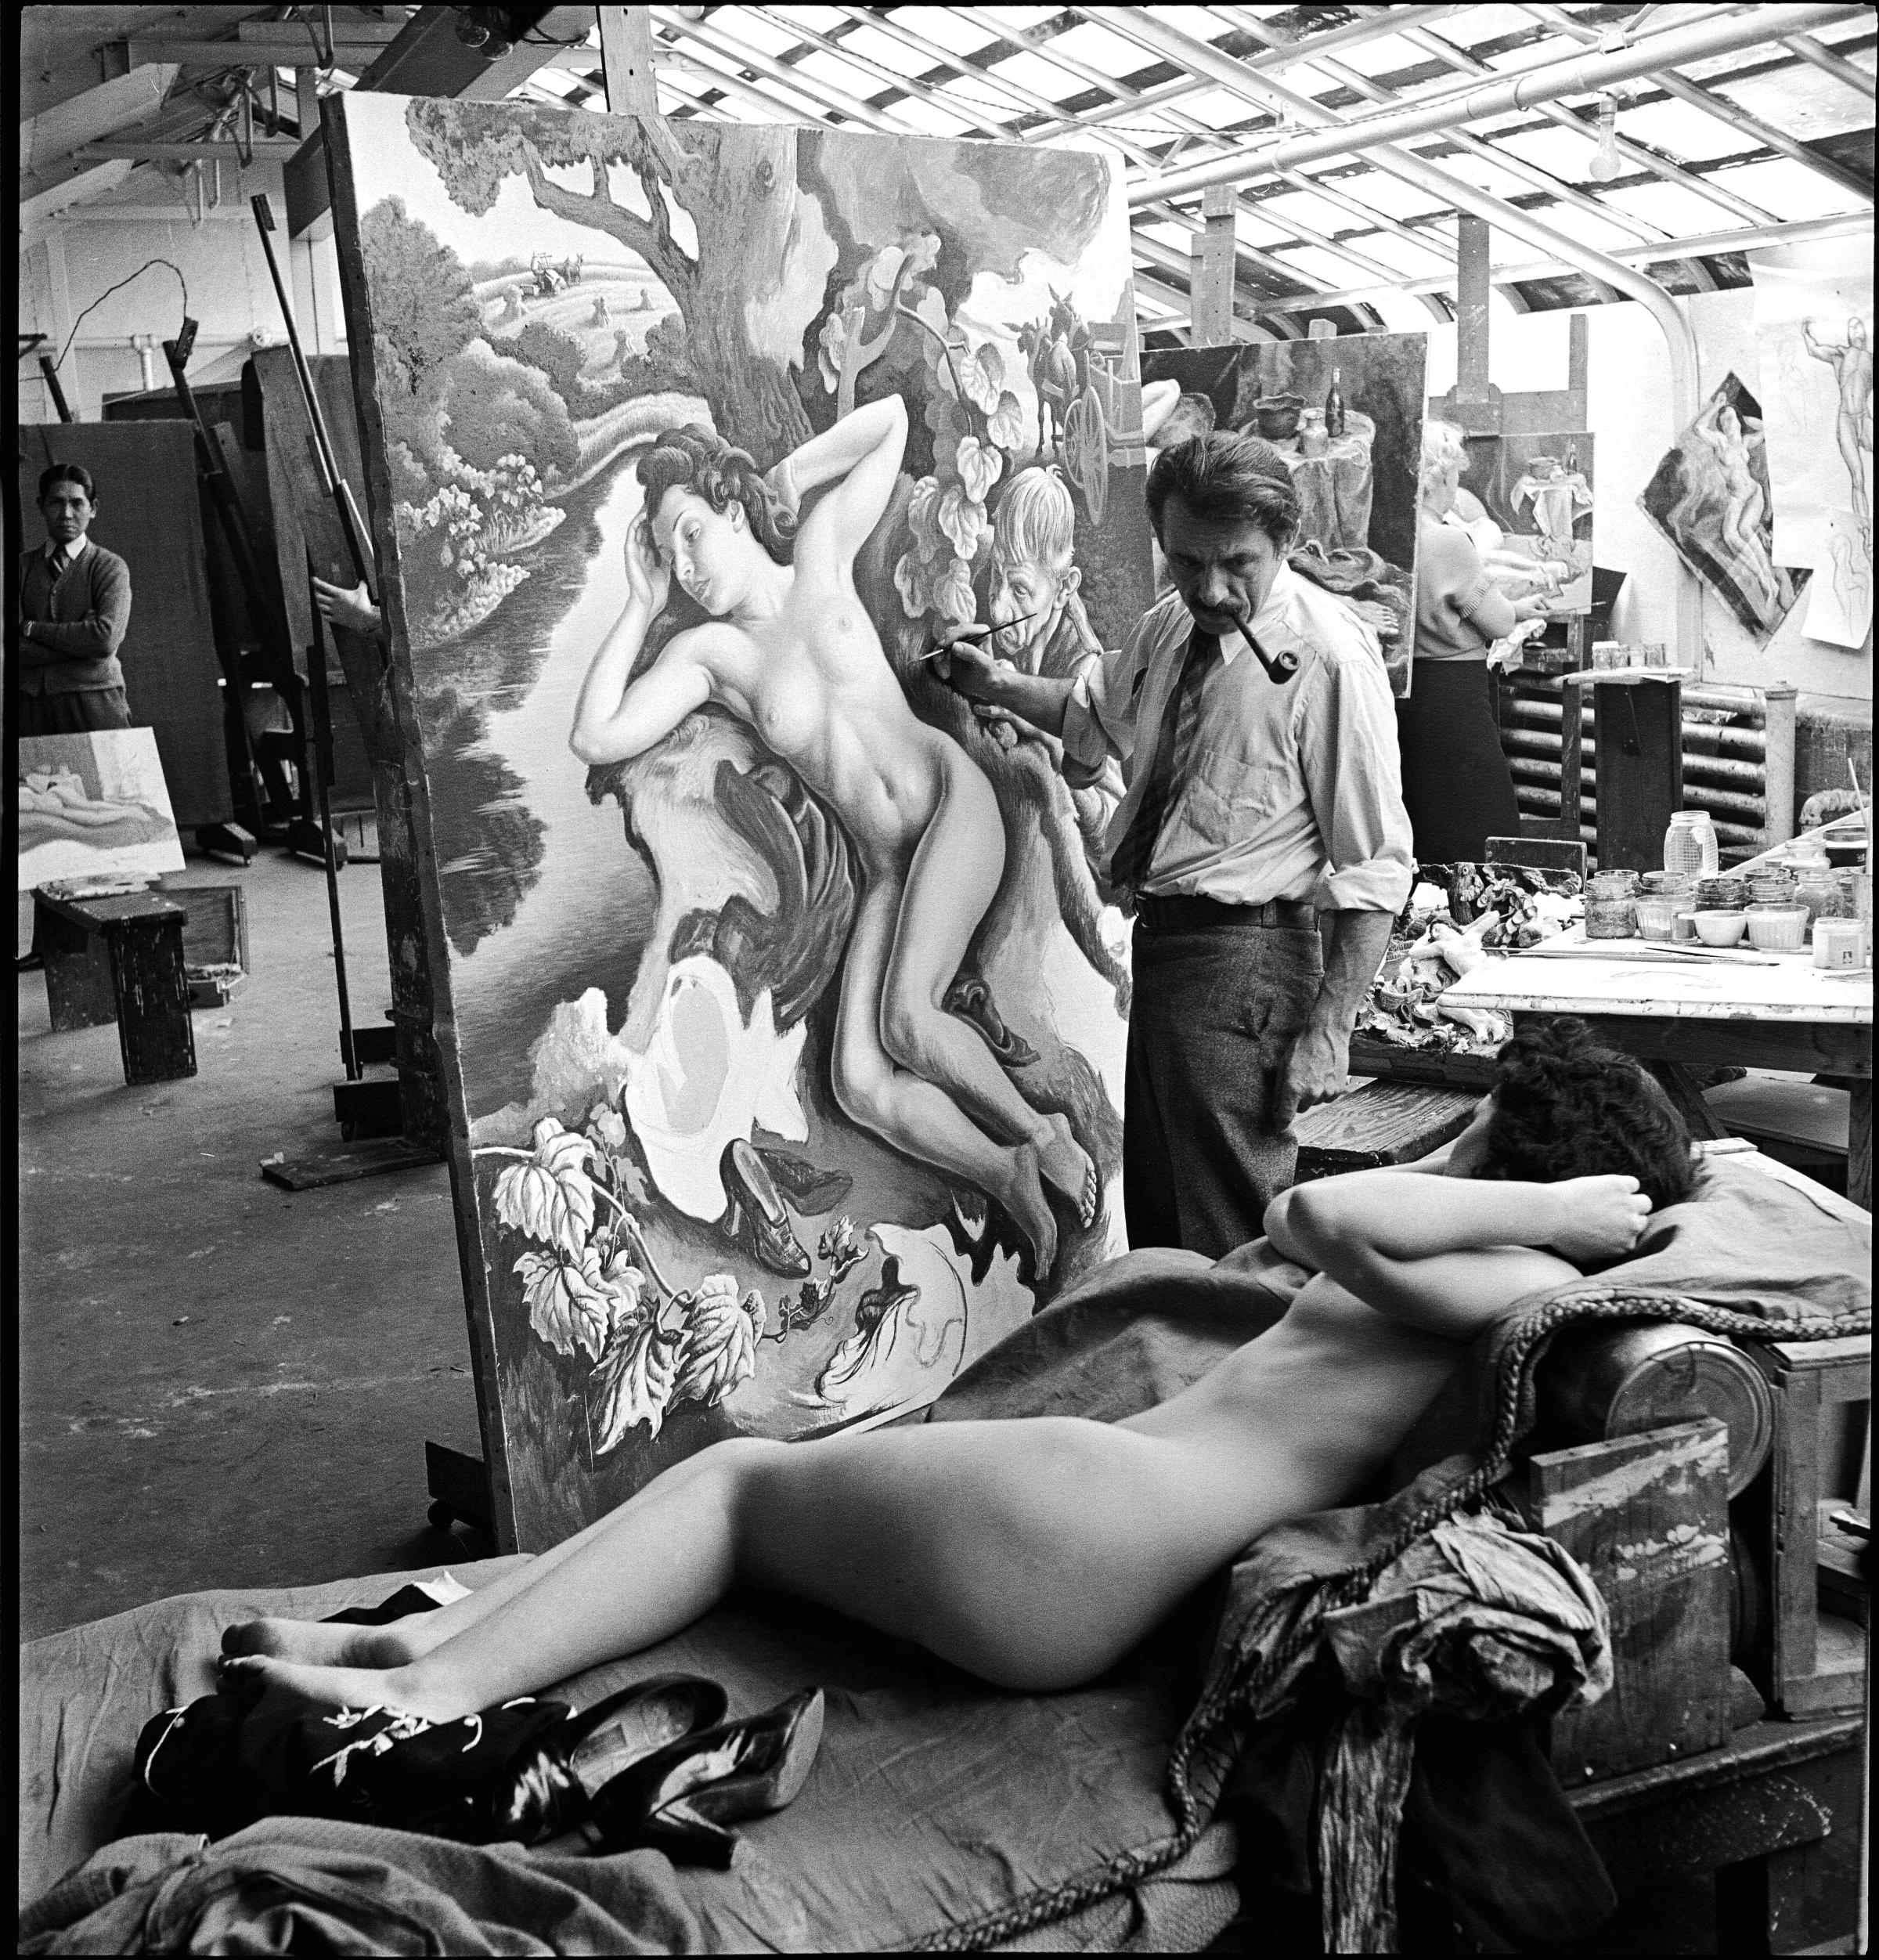 The American painter Thomas Hart Benton (1889 - 1975) works on his painting "Persephone"